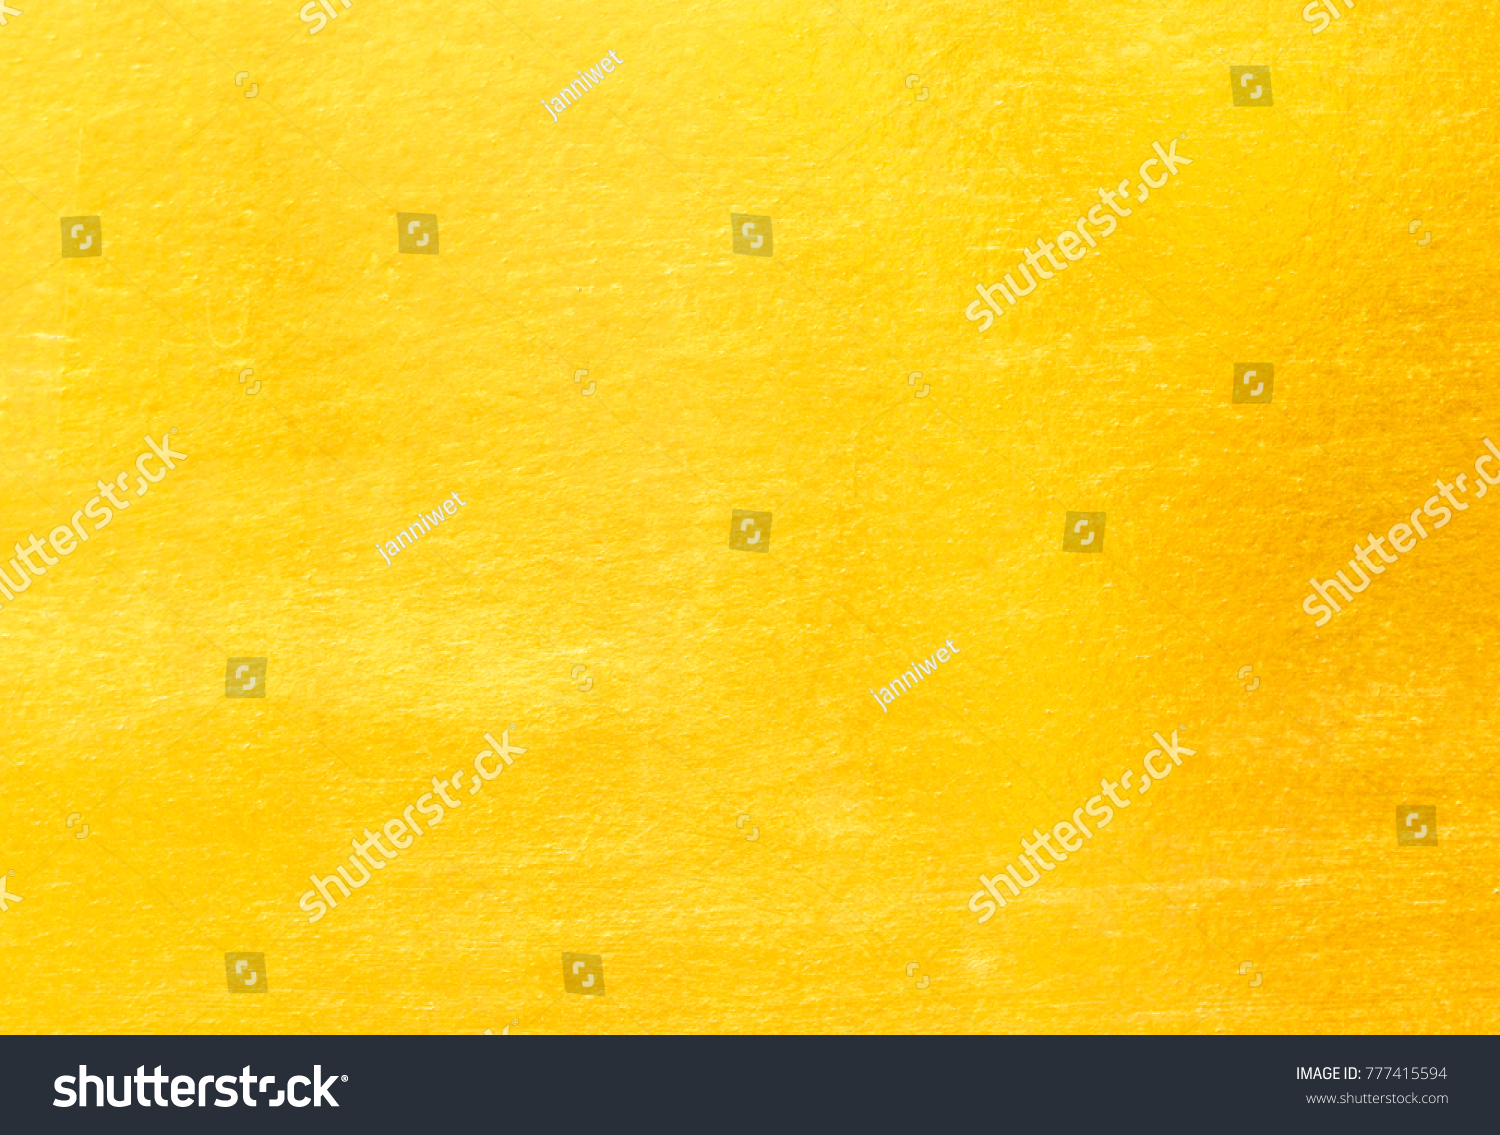 Shiny yellow leaf gold foil texture background #777415594